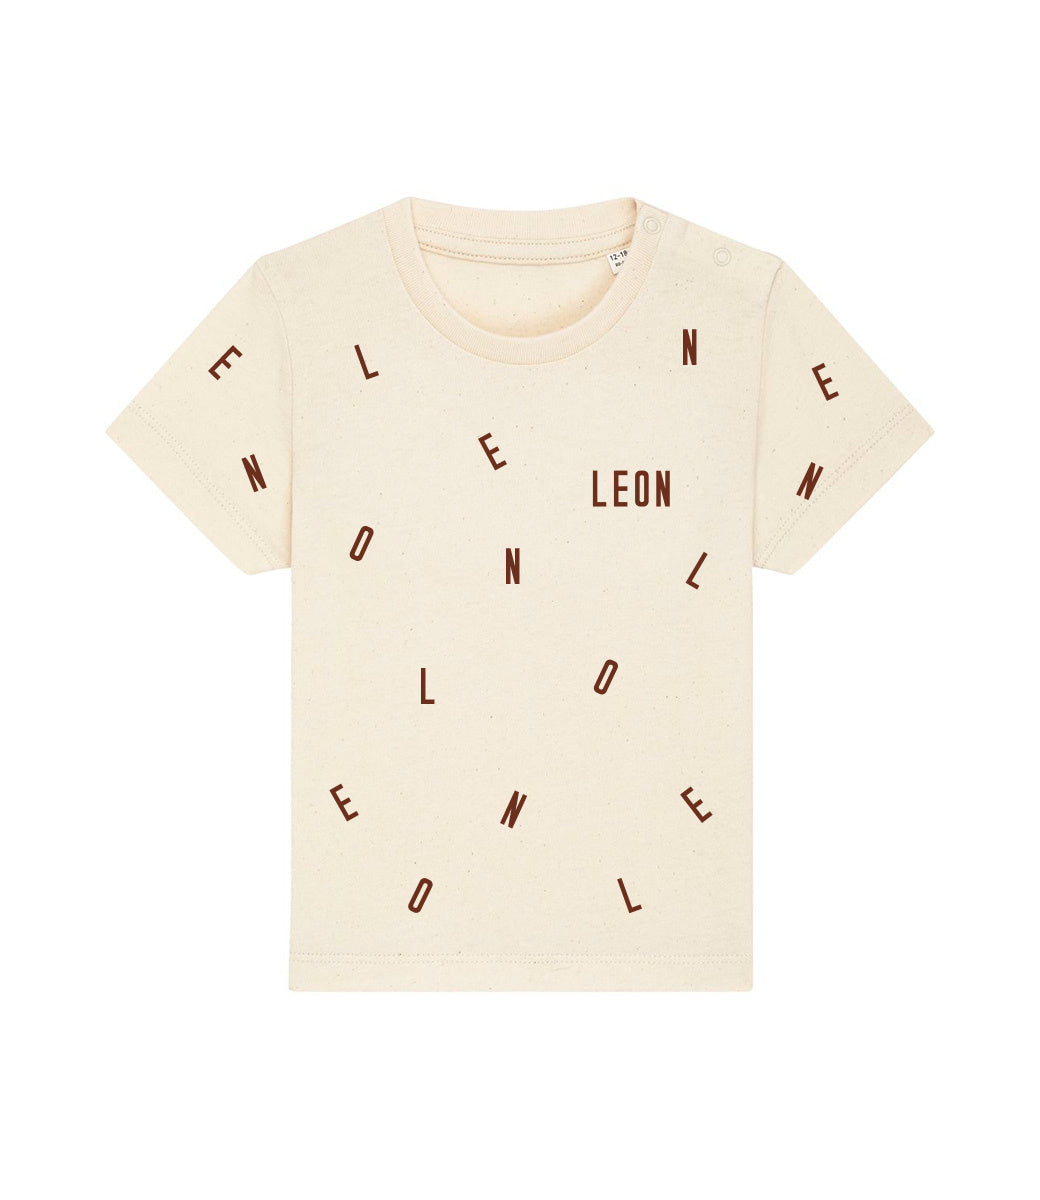 Organic baby name t-shirt // Dancing letters